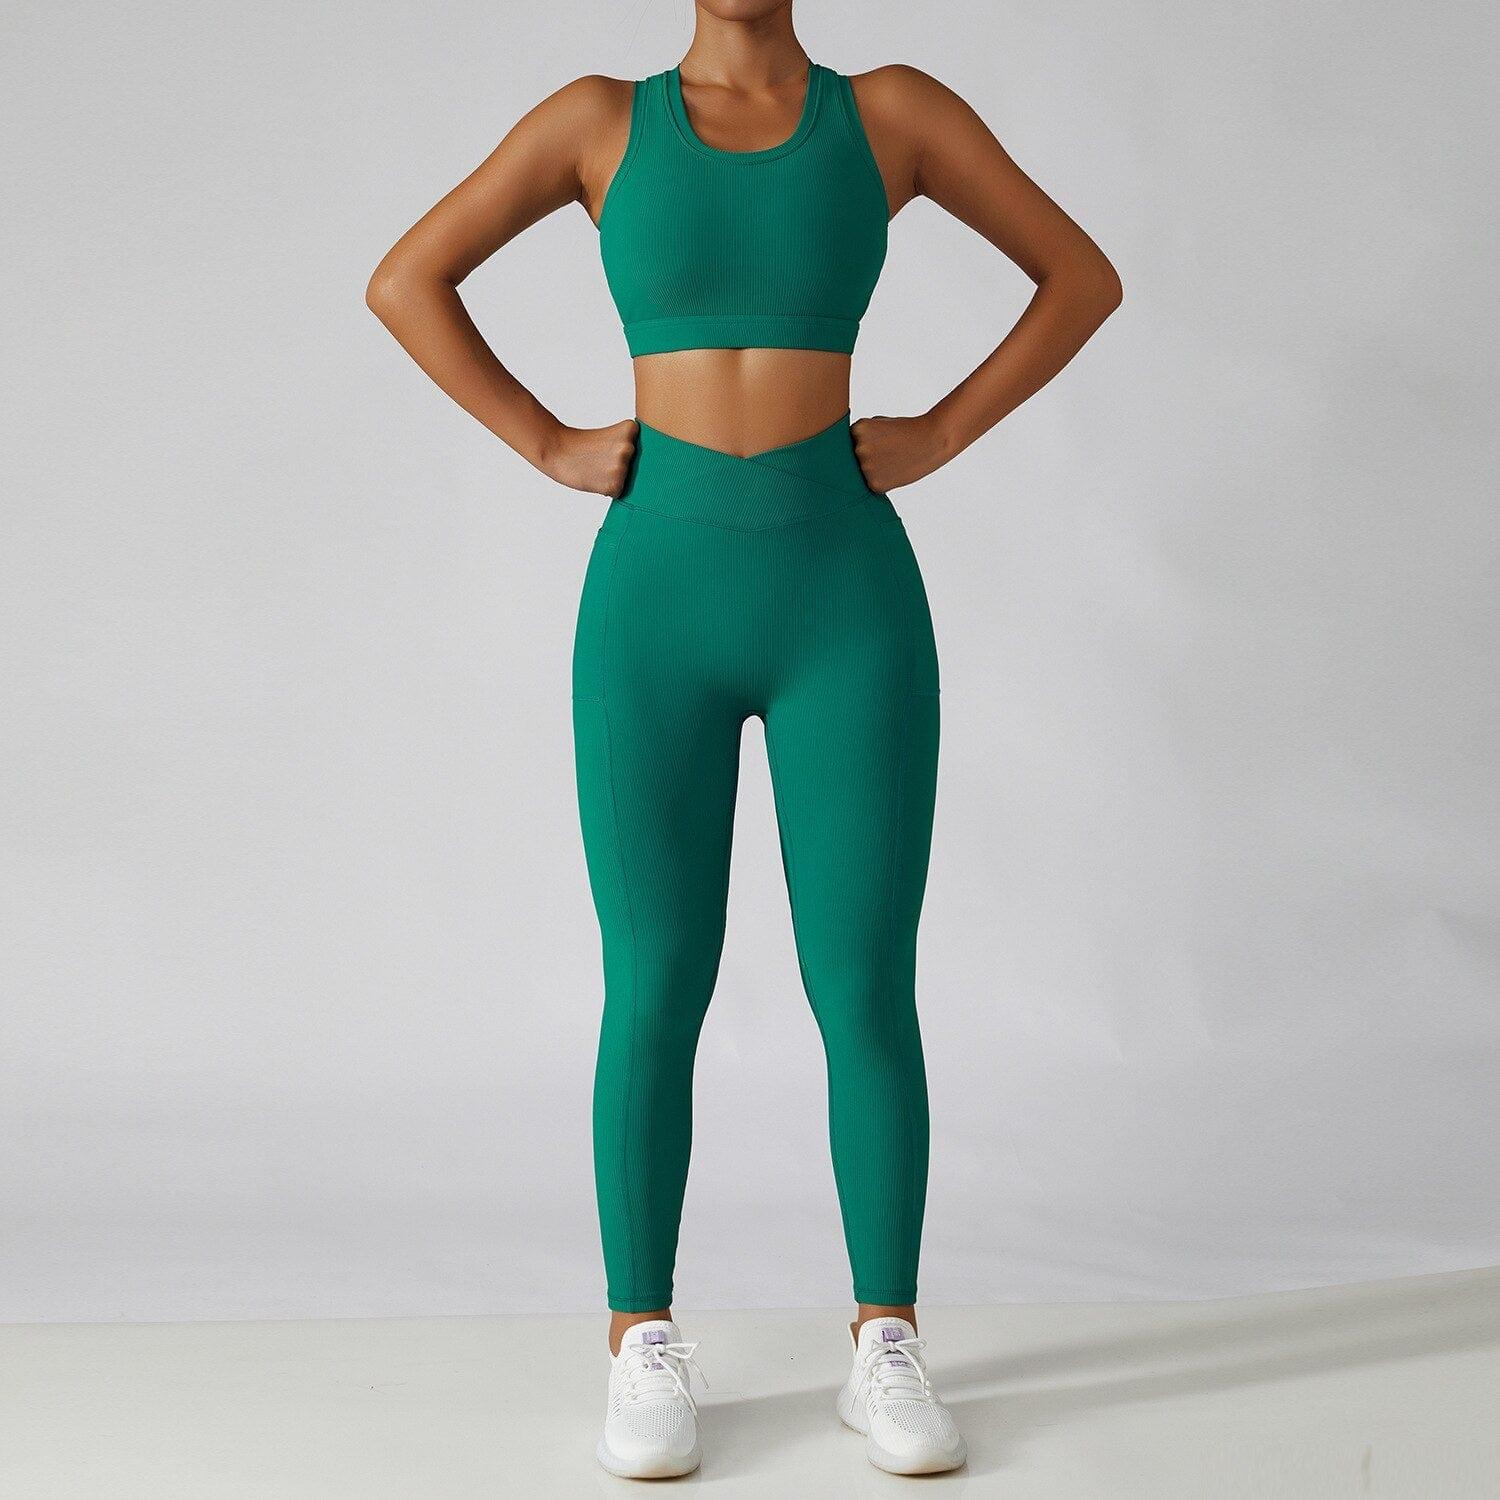 Shop 0 2 Pieces Seamless Women Tracksuit  Yoga Set Running Workout Sportswear Gym Clothes Fitness Bra High Waist Leggings Sports Suit Mademoiselle Home Decor